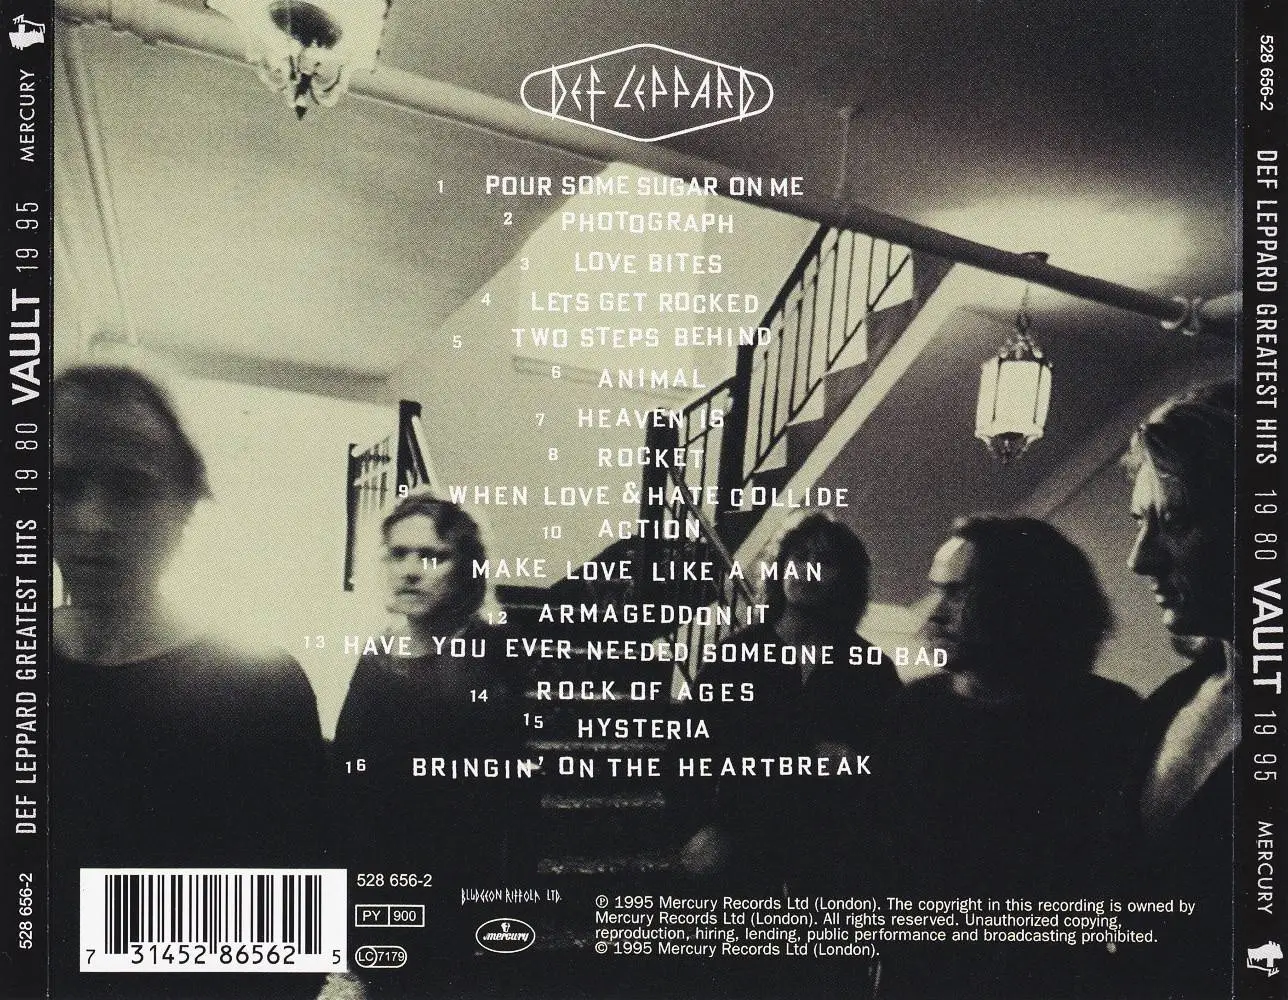 Def Leppard - Vault: Def Leppard Greatest Hits (1980–1995) (1995 ...